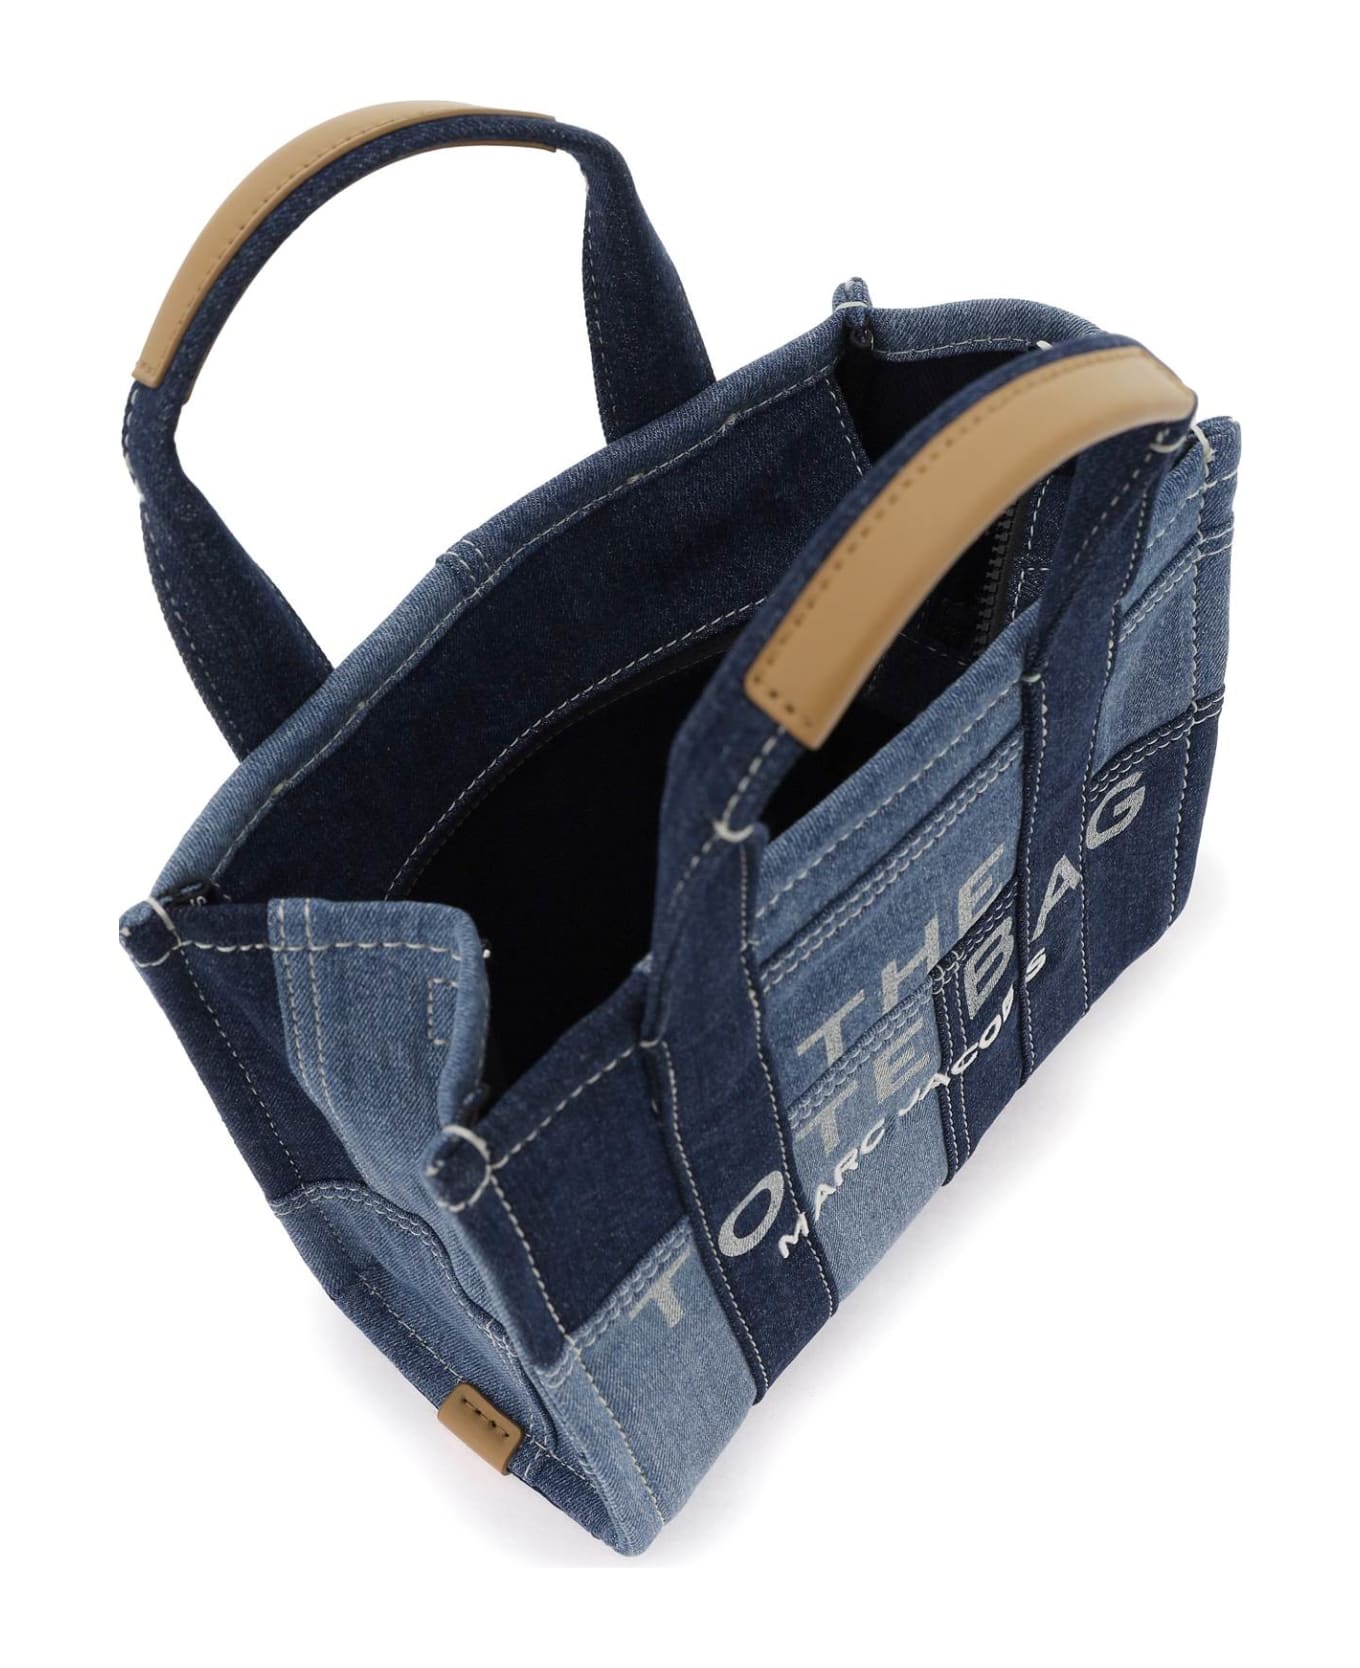 Marc Jacobs The Denim Small Tote Bag - Blue Denim トートバッグ